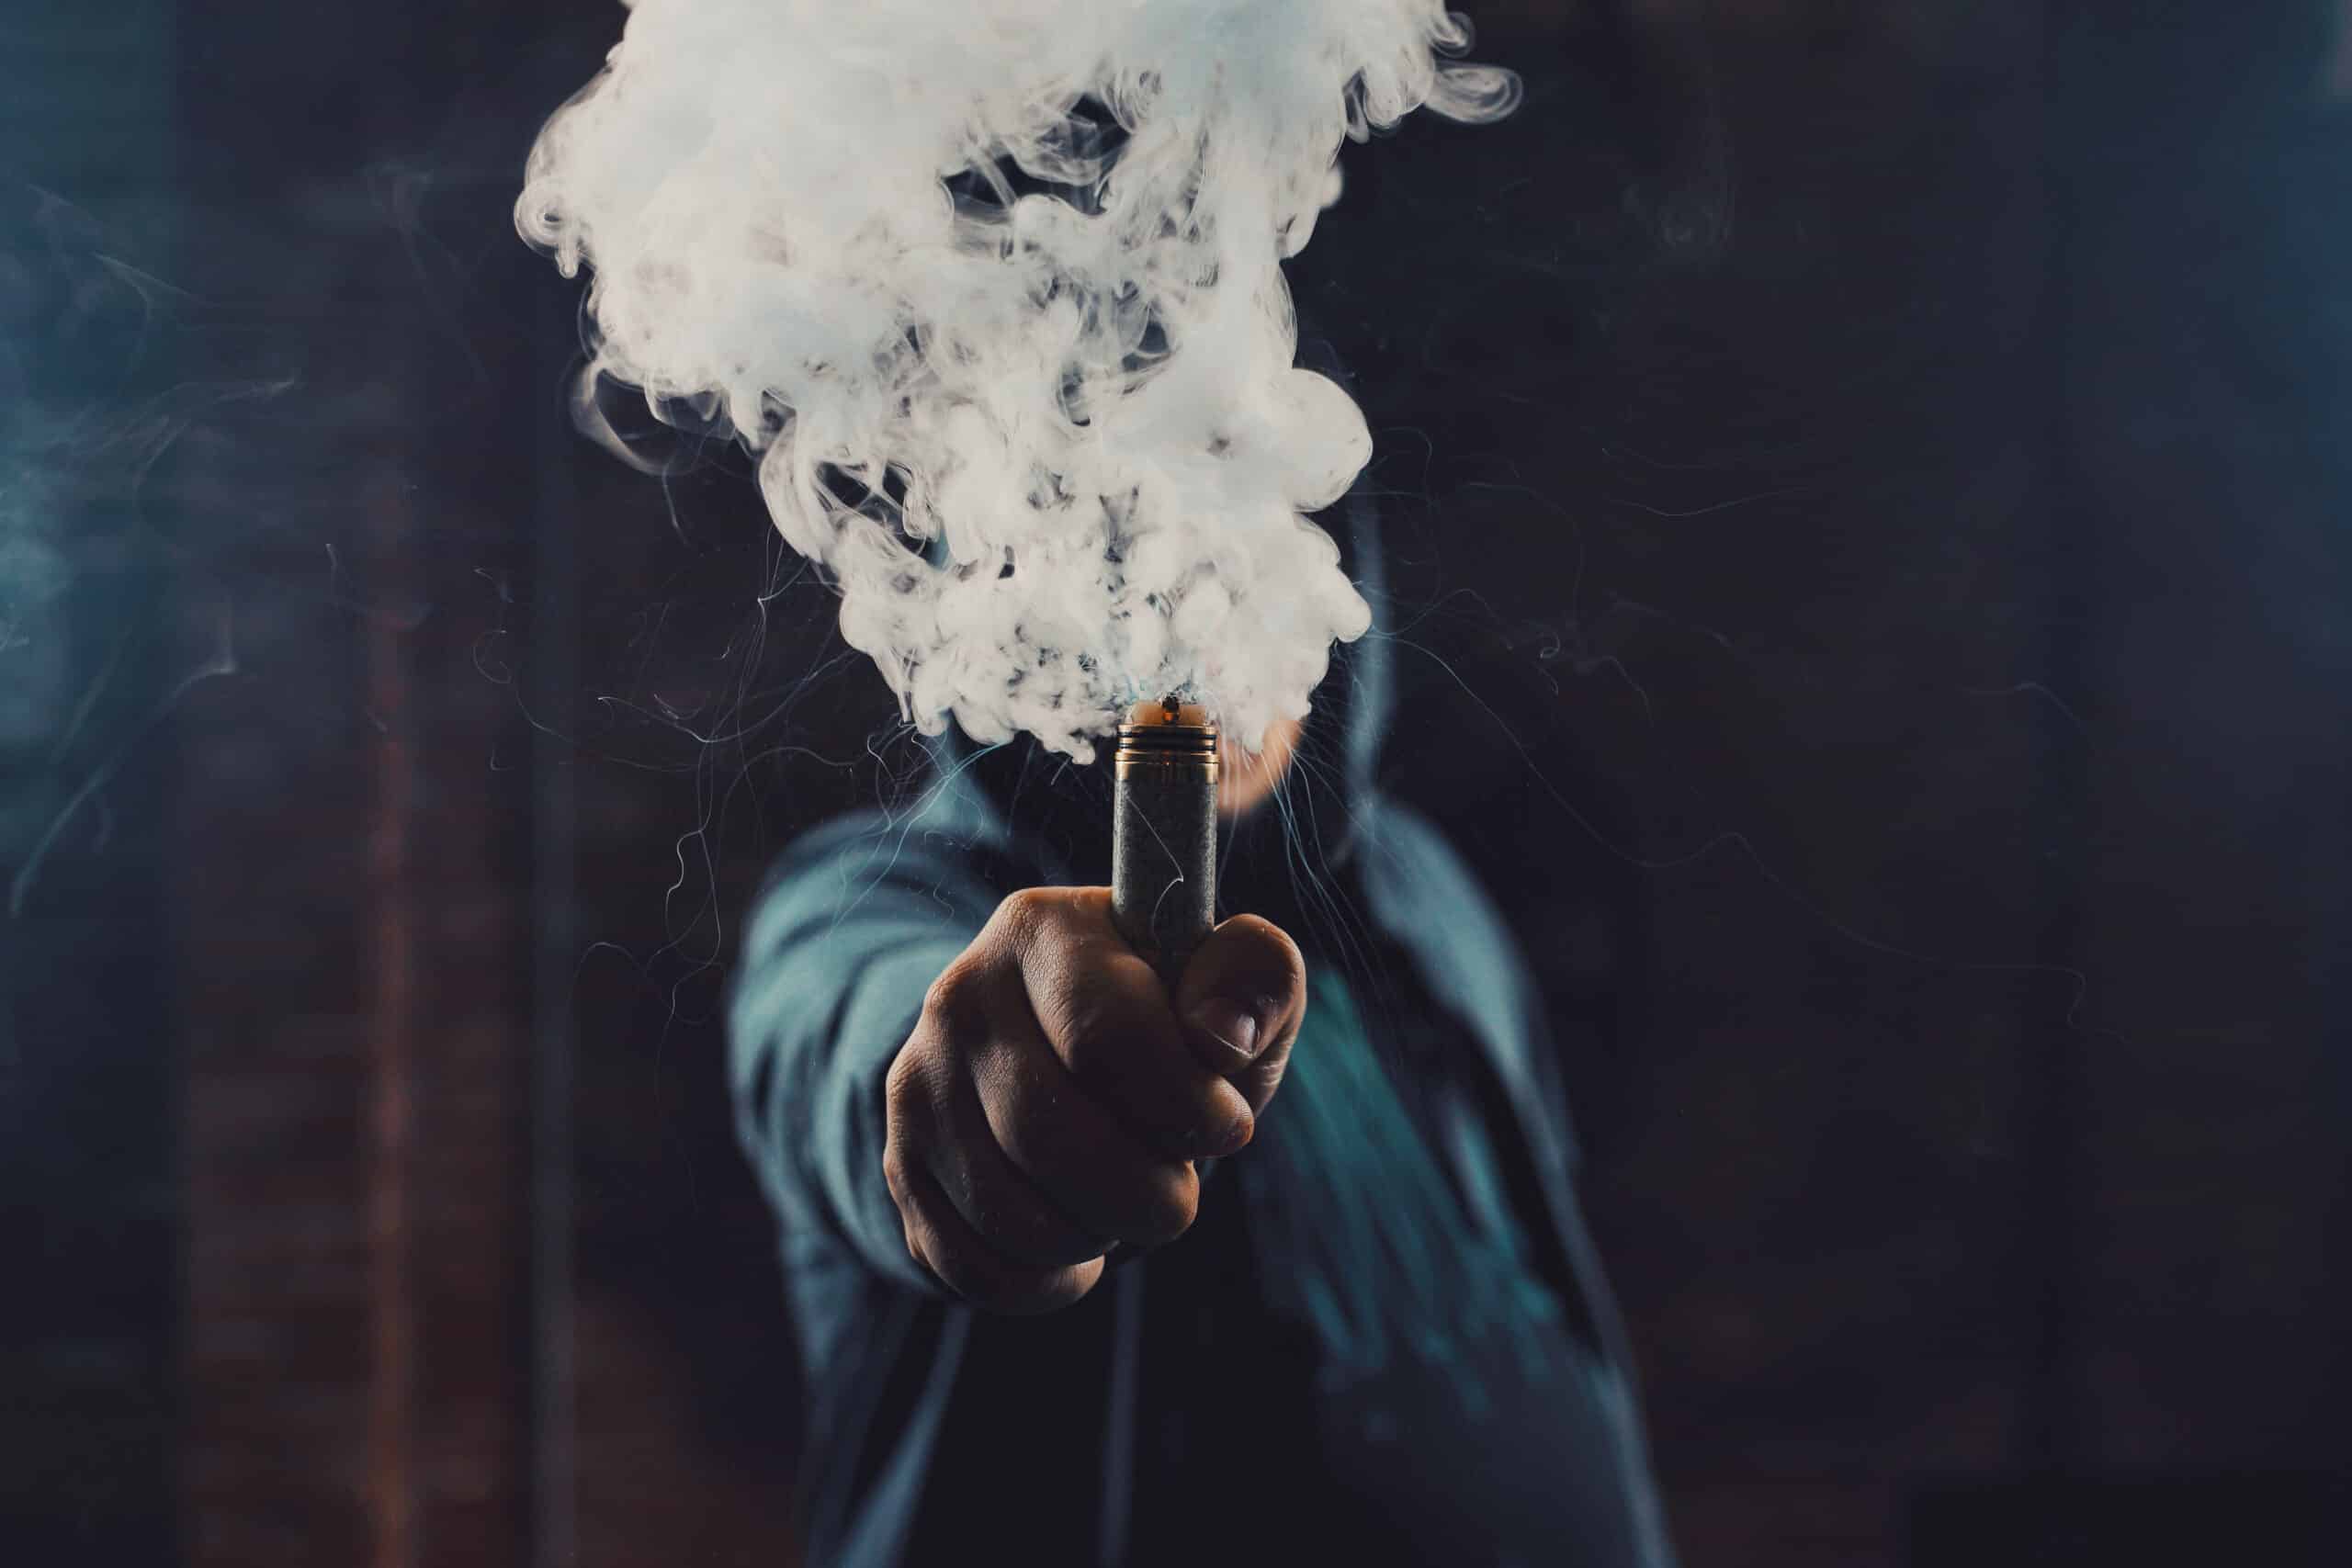 Vaping man wearing a hat, holding up a mod, obscured behind a cloud of vapor.